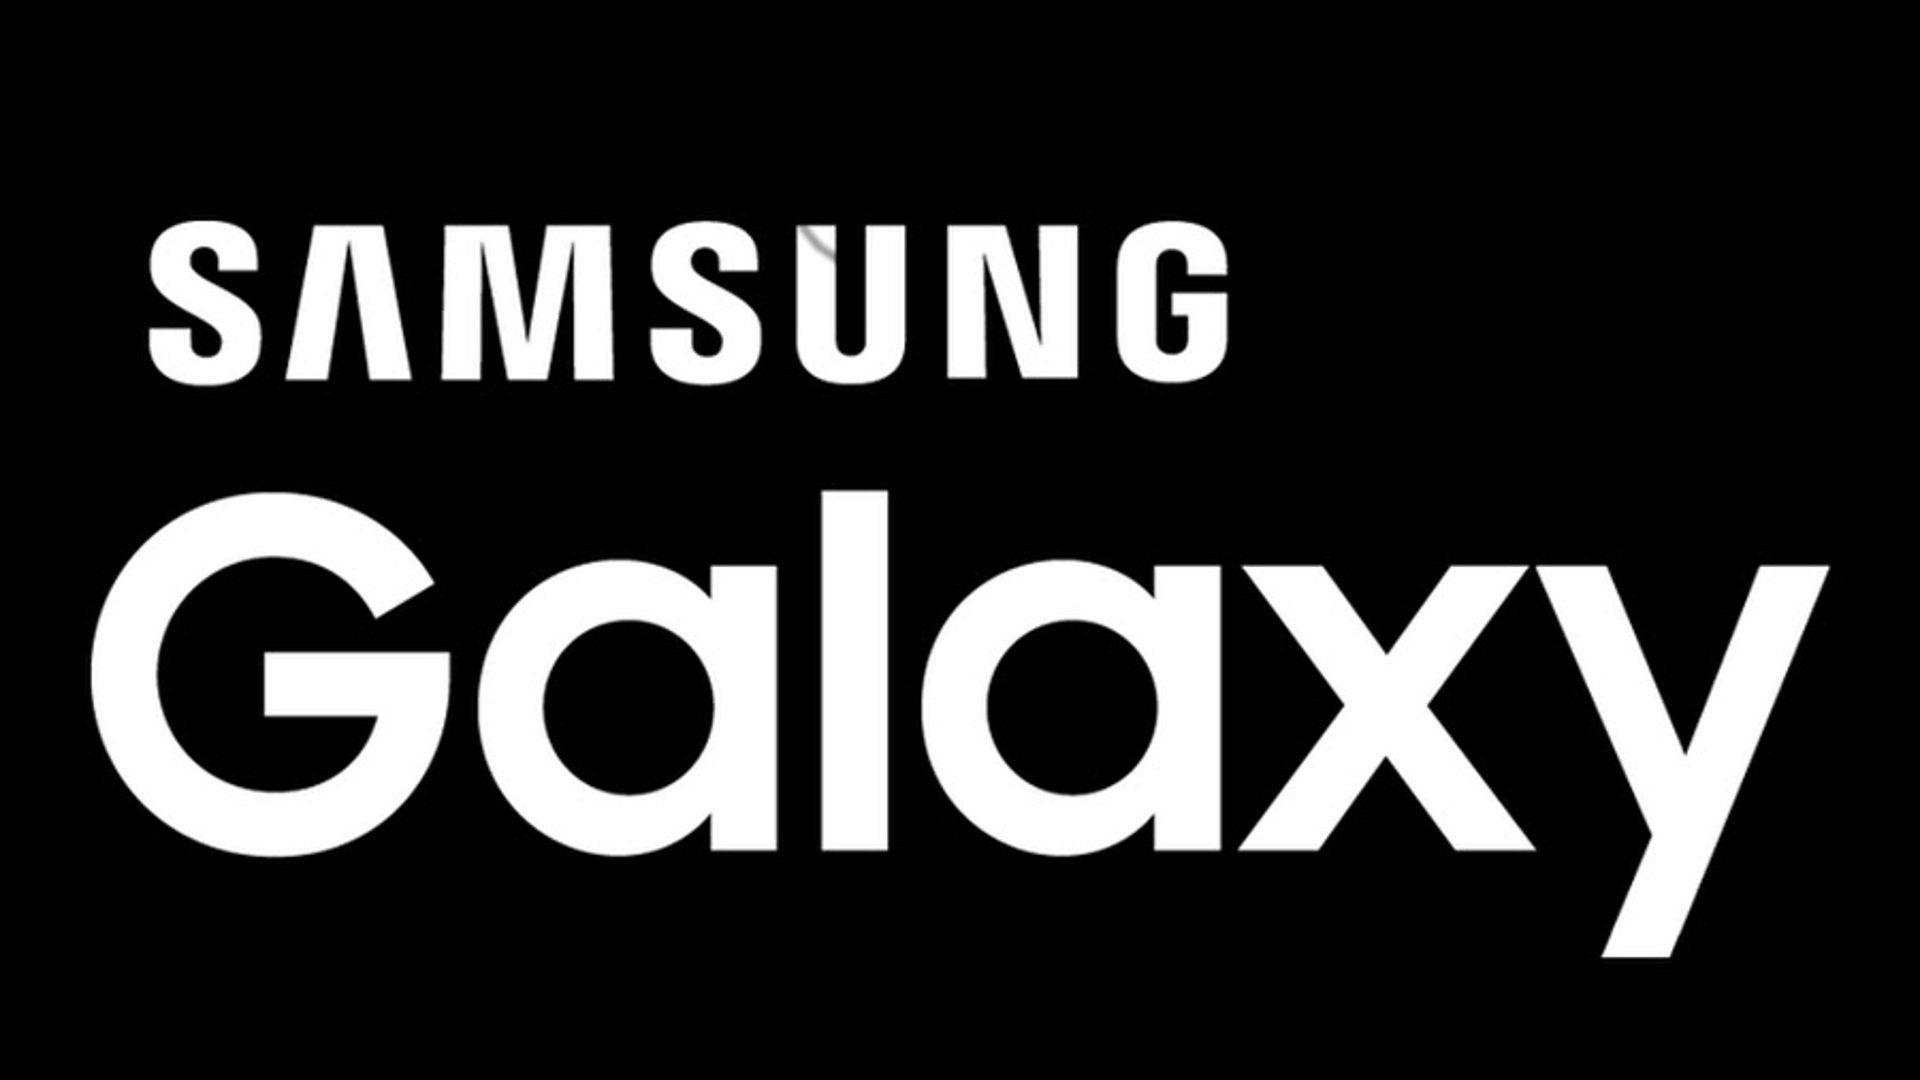 Samsung 2018 Logo - Samsung: These are the devices that will be released in 2018